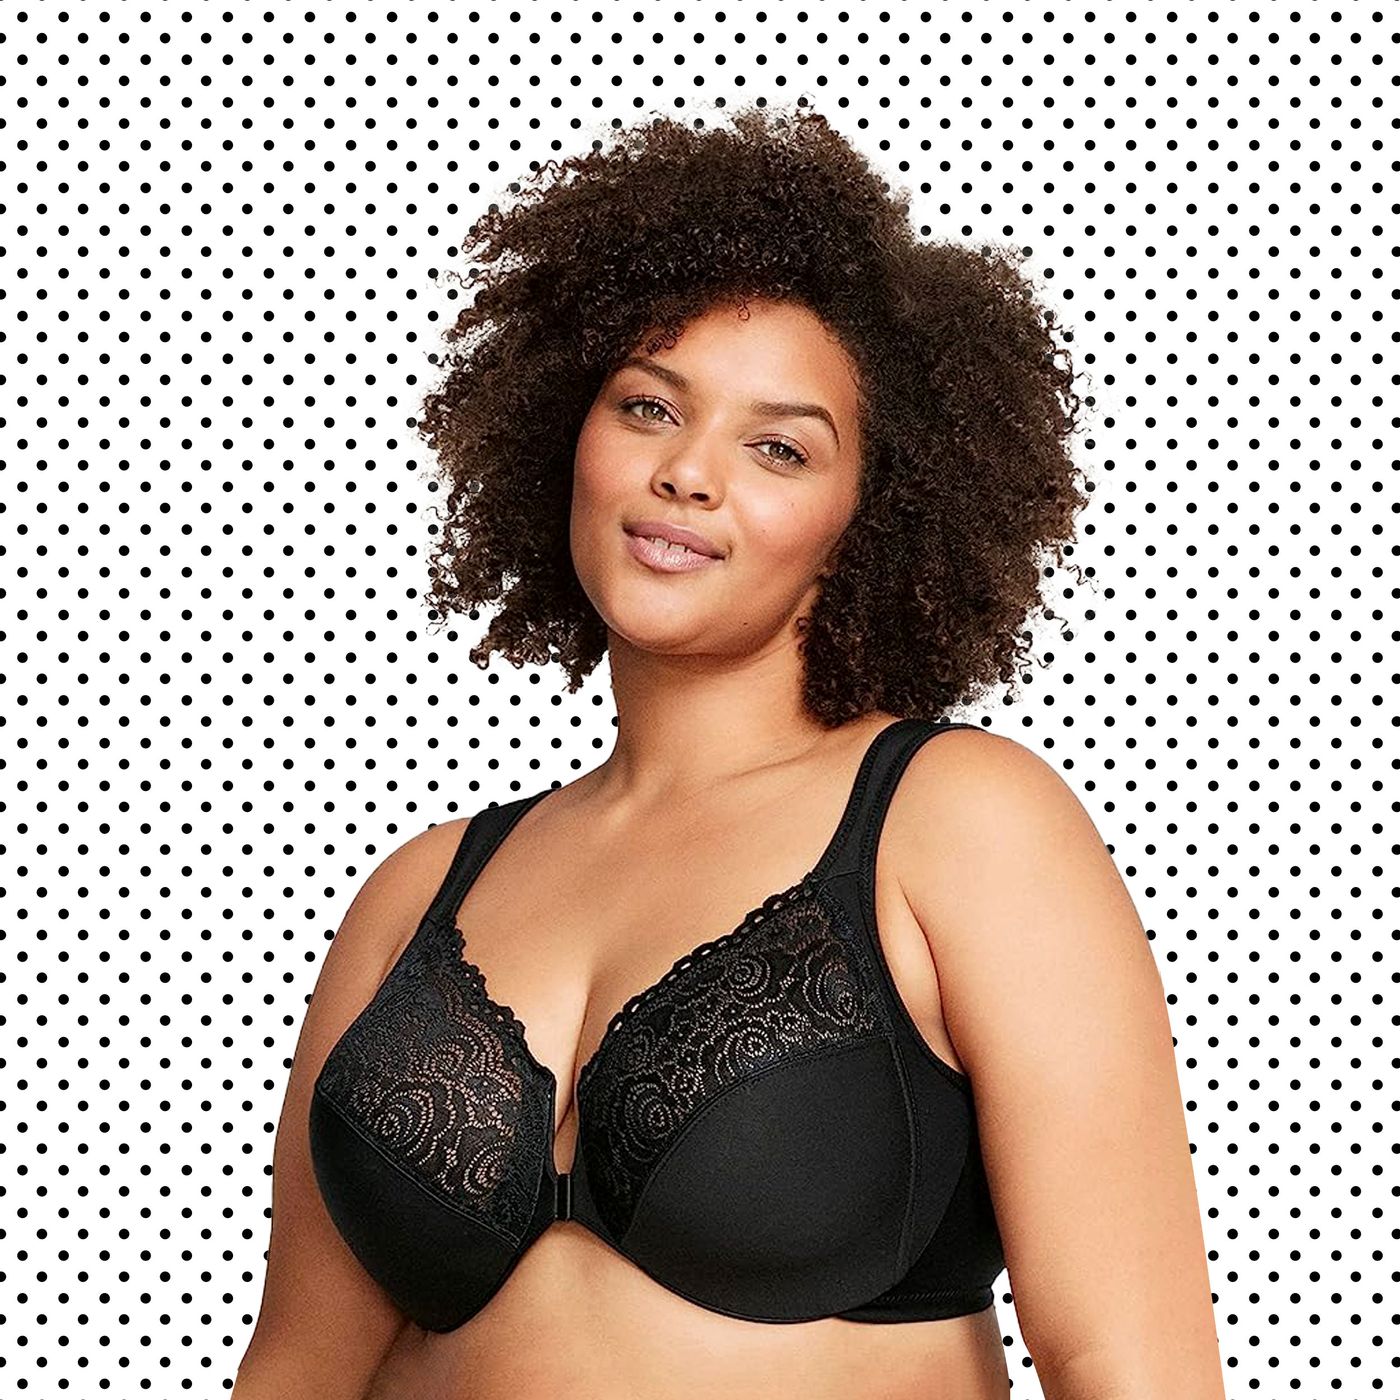 The classic bra with flexible underwiring, fitting and all in lace